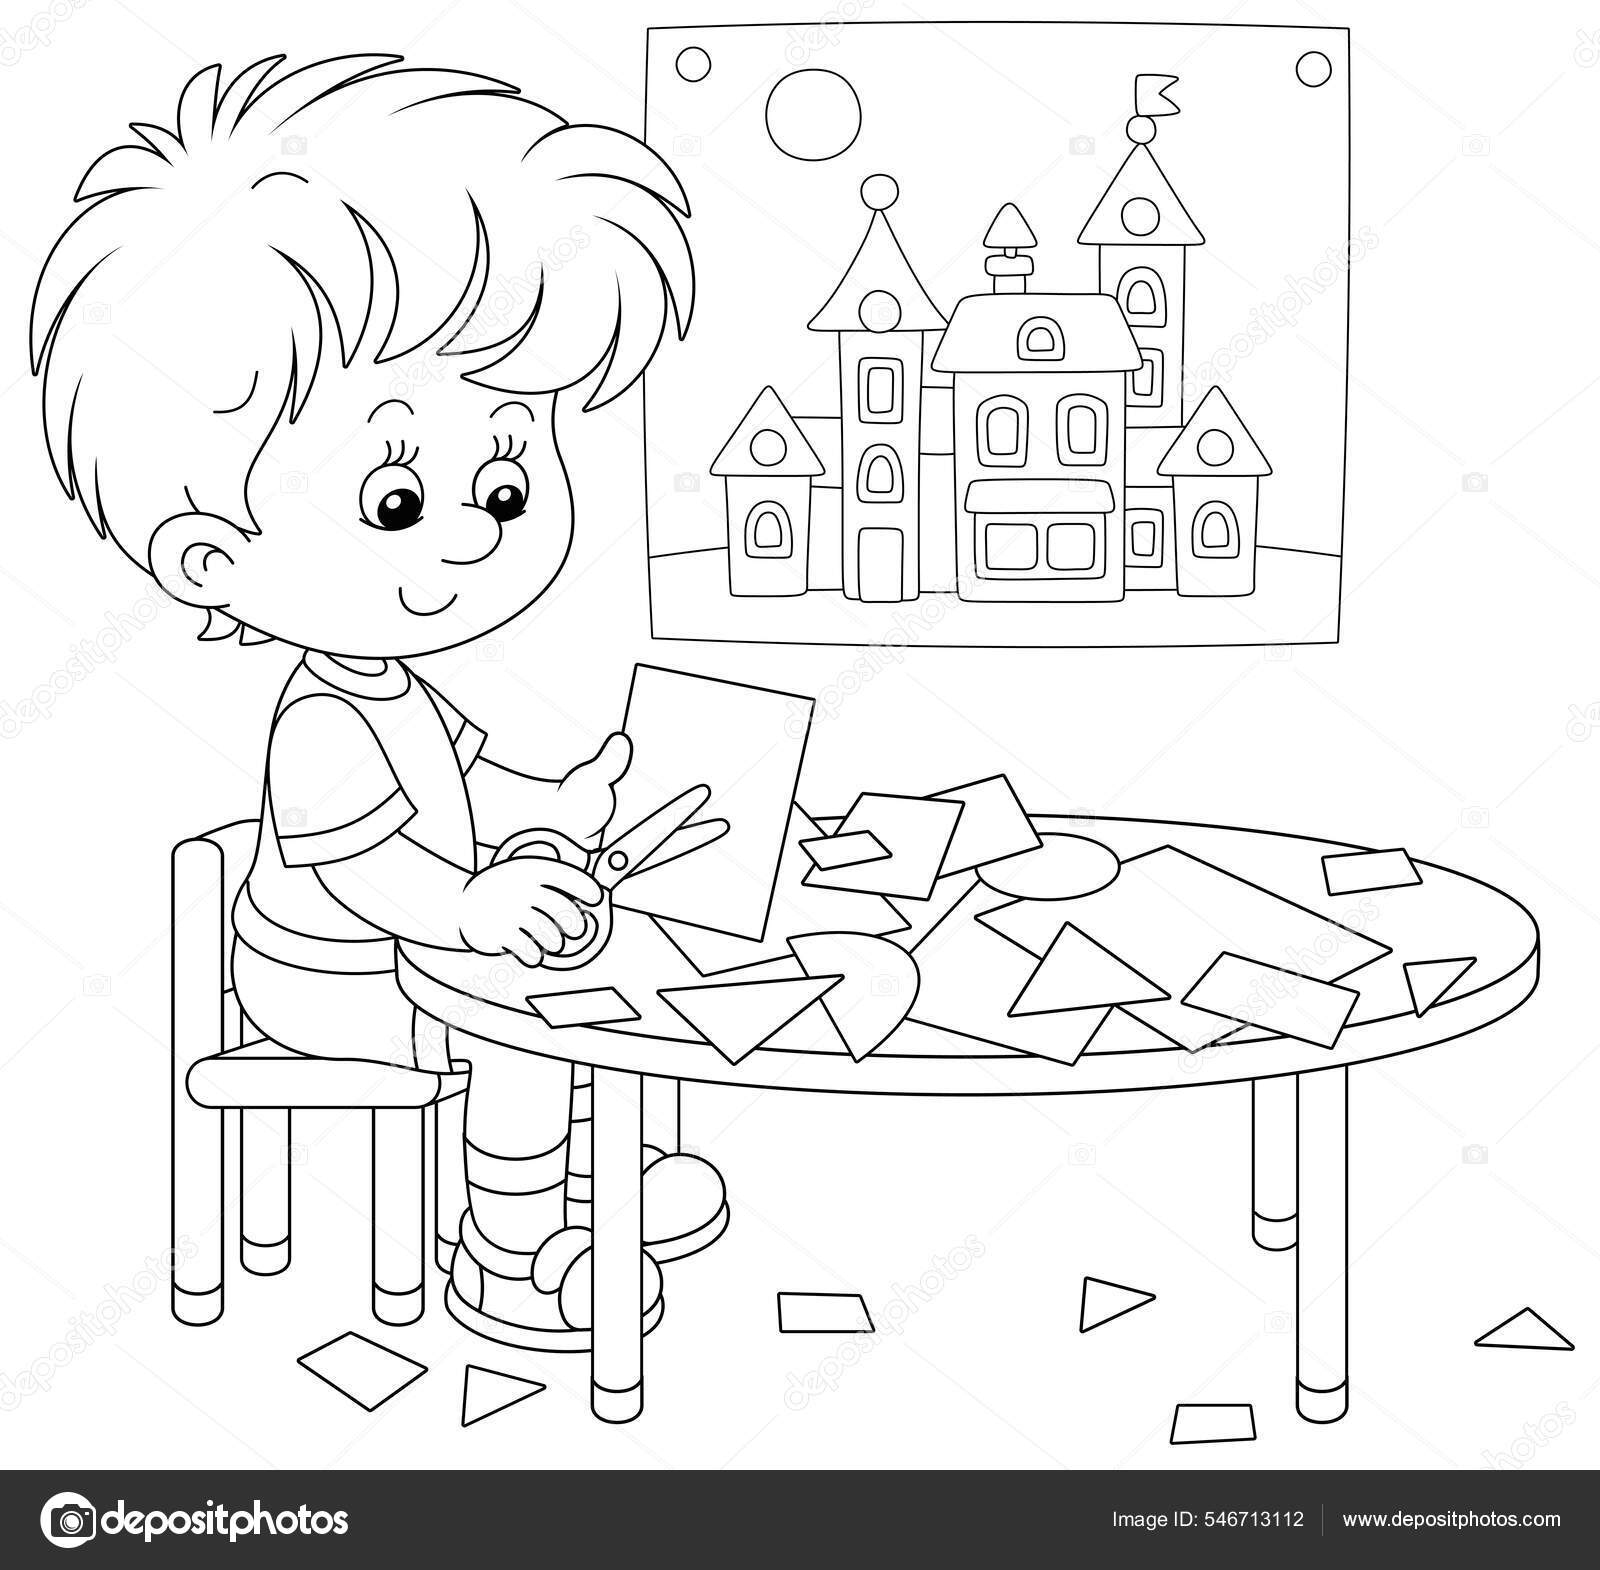 Kids drawing on white sheet of paper background Stock Photo by ©belchonock  71386039